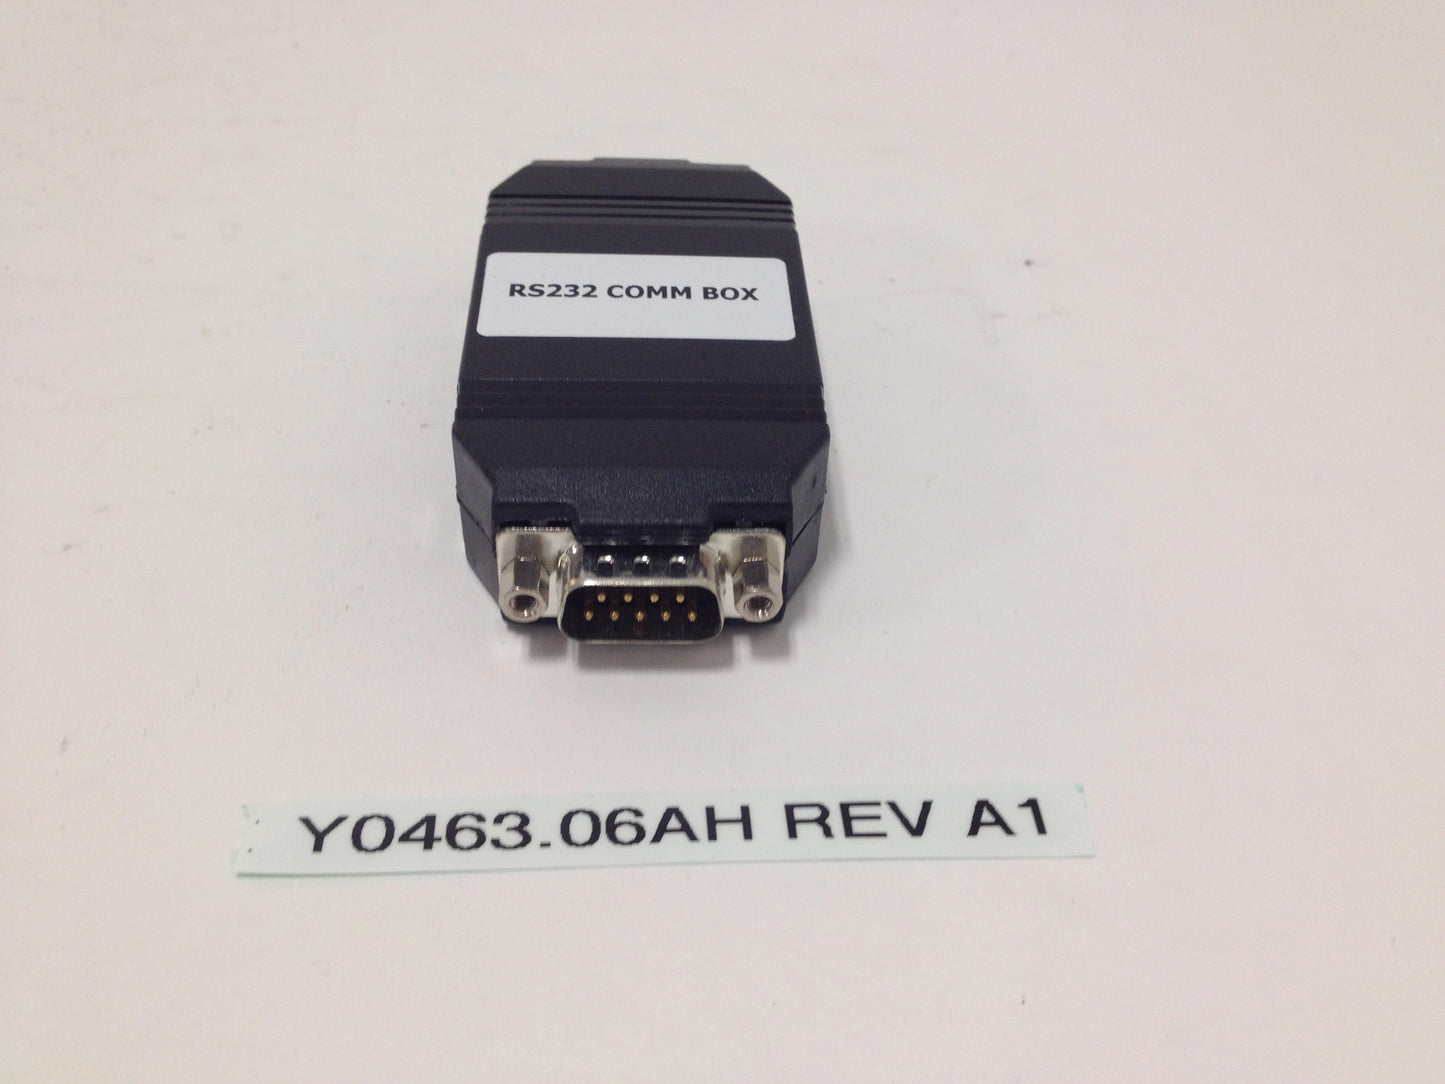 COMMUNICATIONS BOX FOR PC CONNECTIVITY Y0463.06AH Rev A1